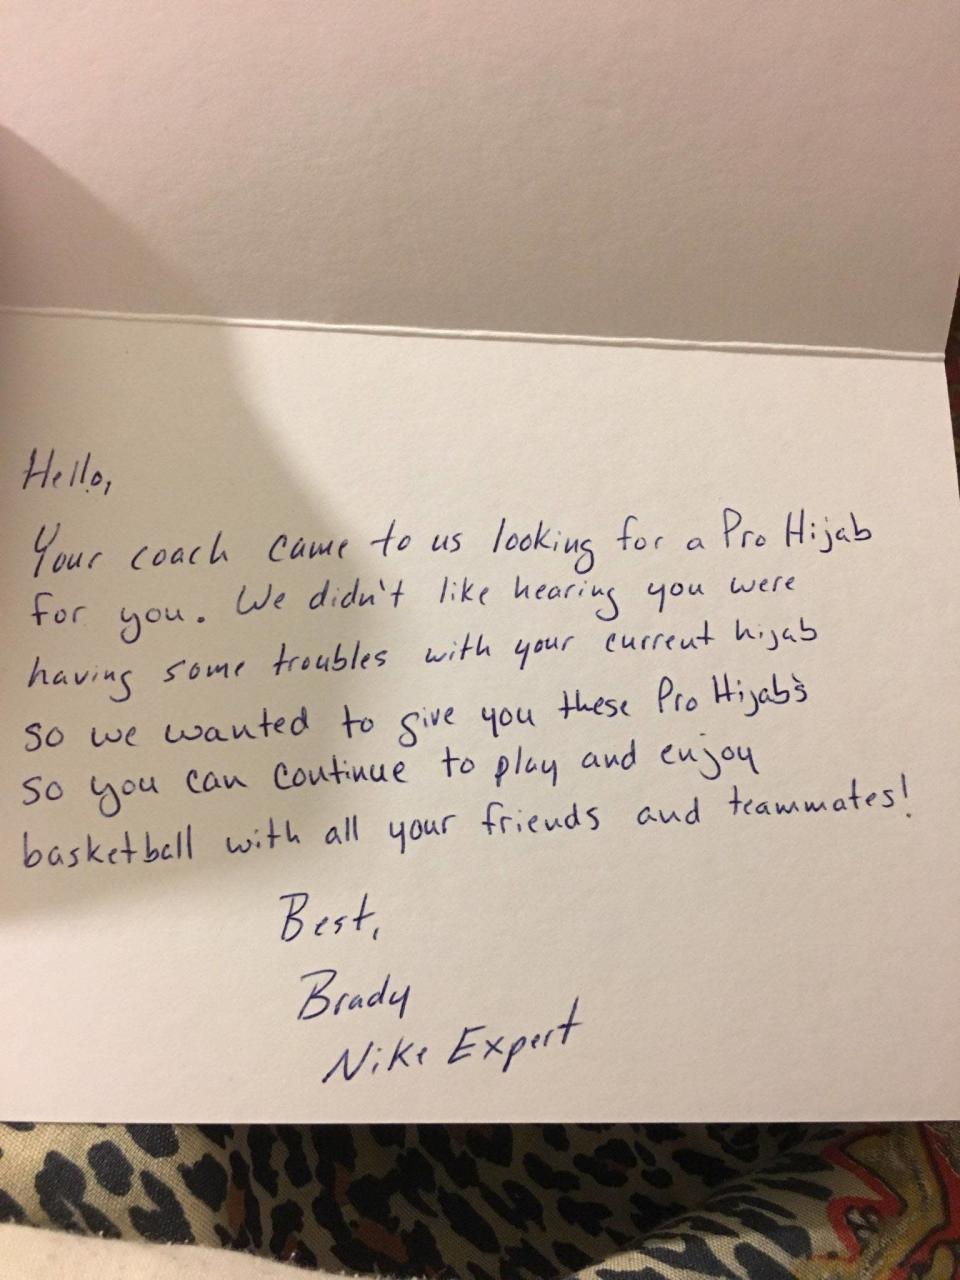 The letter Camrin Hampton received from ‘Brady,’ the mysterious Nike customer service agent whose good deed provided her the hijab she needed to keep playing basketball. (Photo via Camrin Hampton)